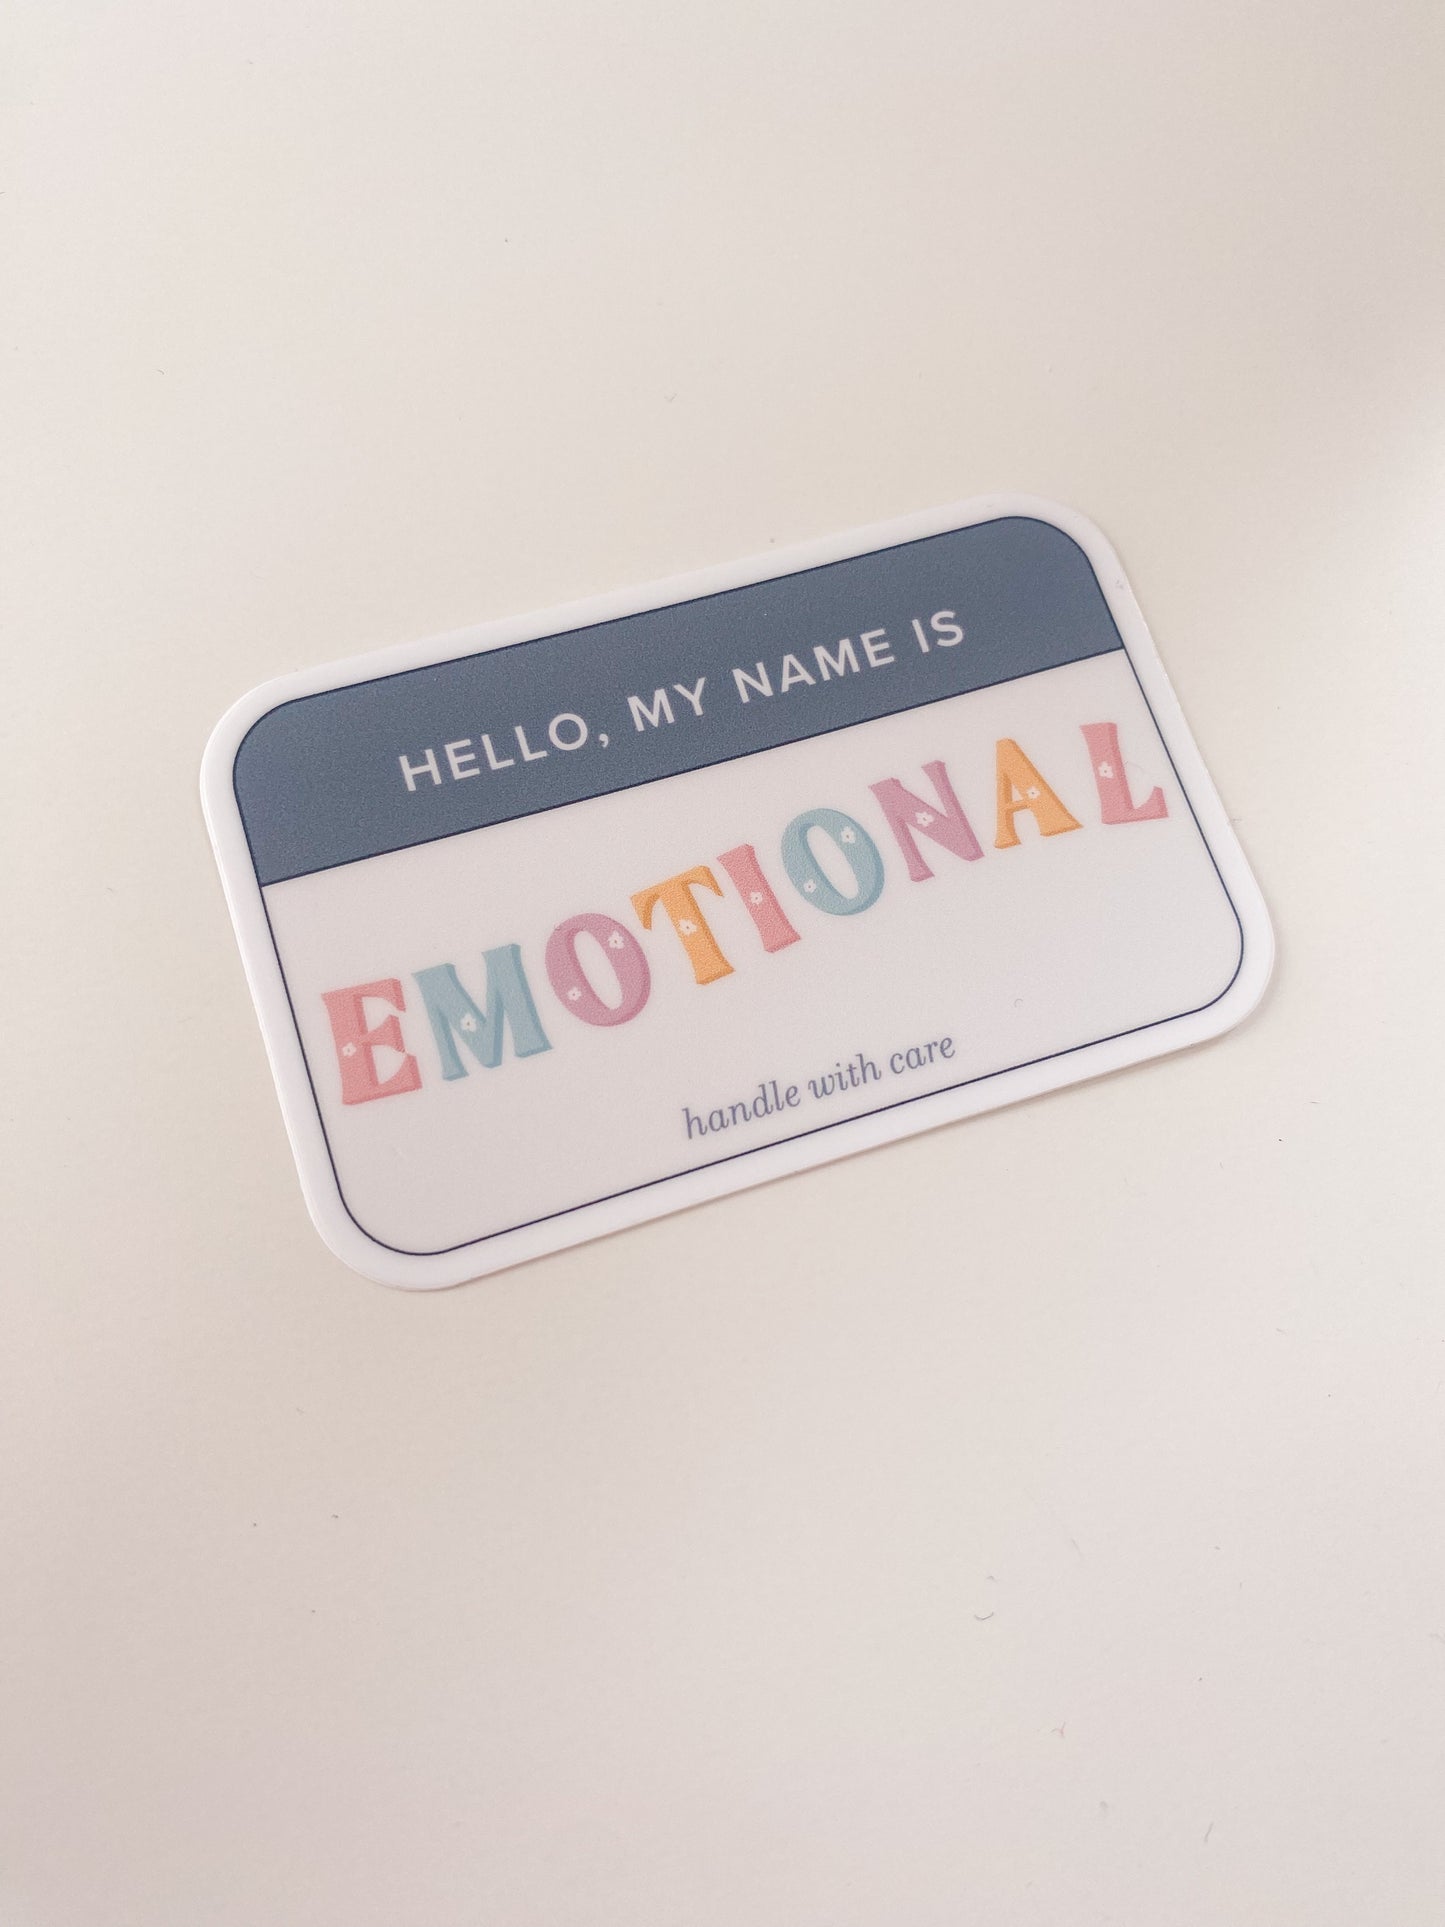 Emotional - Handle with Care Sticker